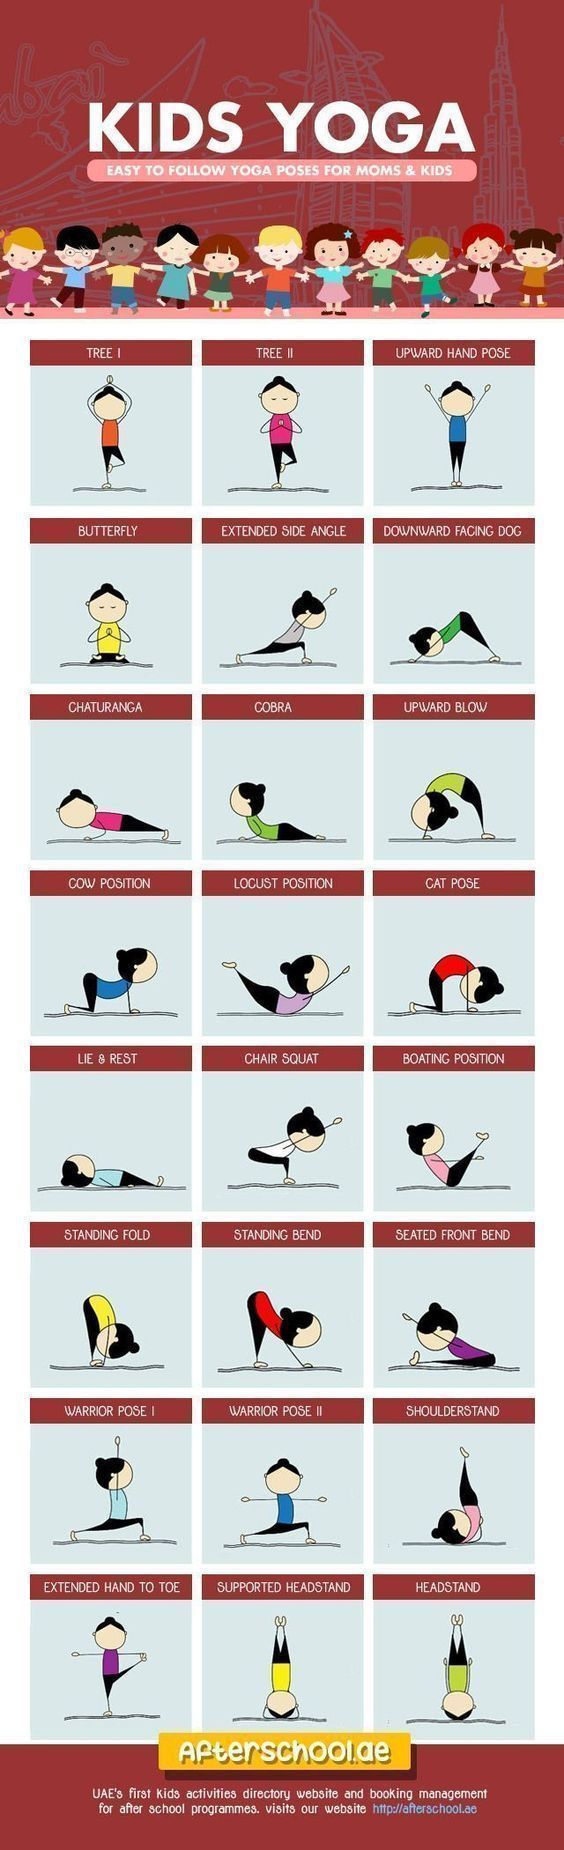 Easy Yoga Poses For Kids Infographic